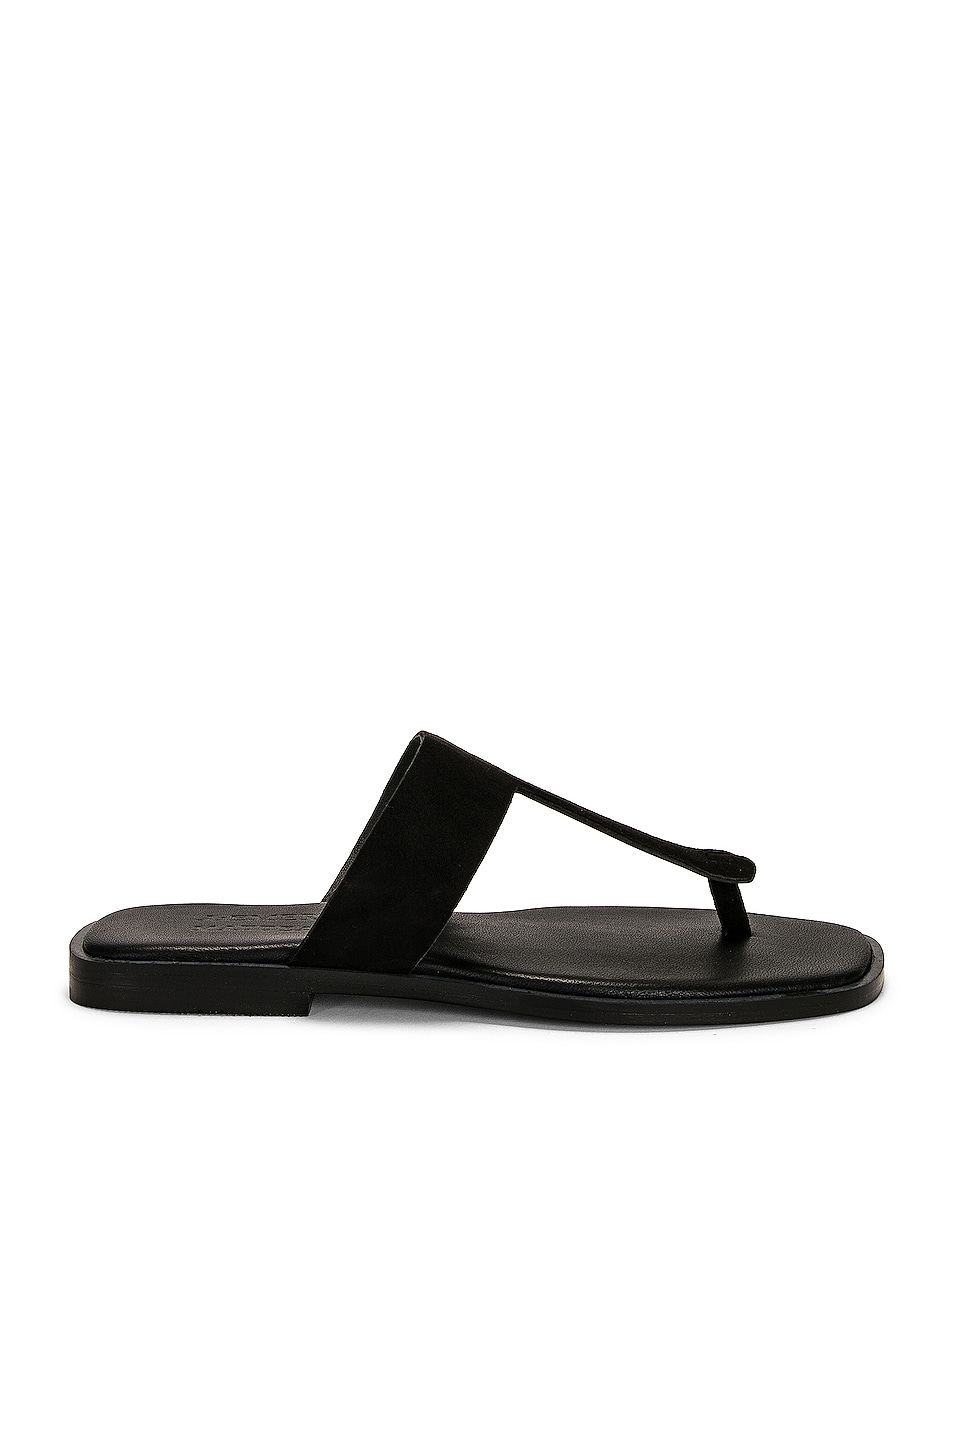 Image 1 of A.EMERY x Matteau Rhodes Sandal in Black Suede